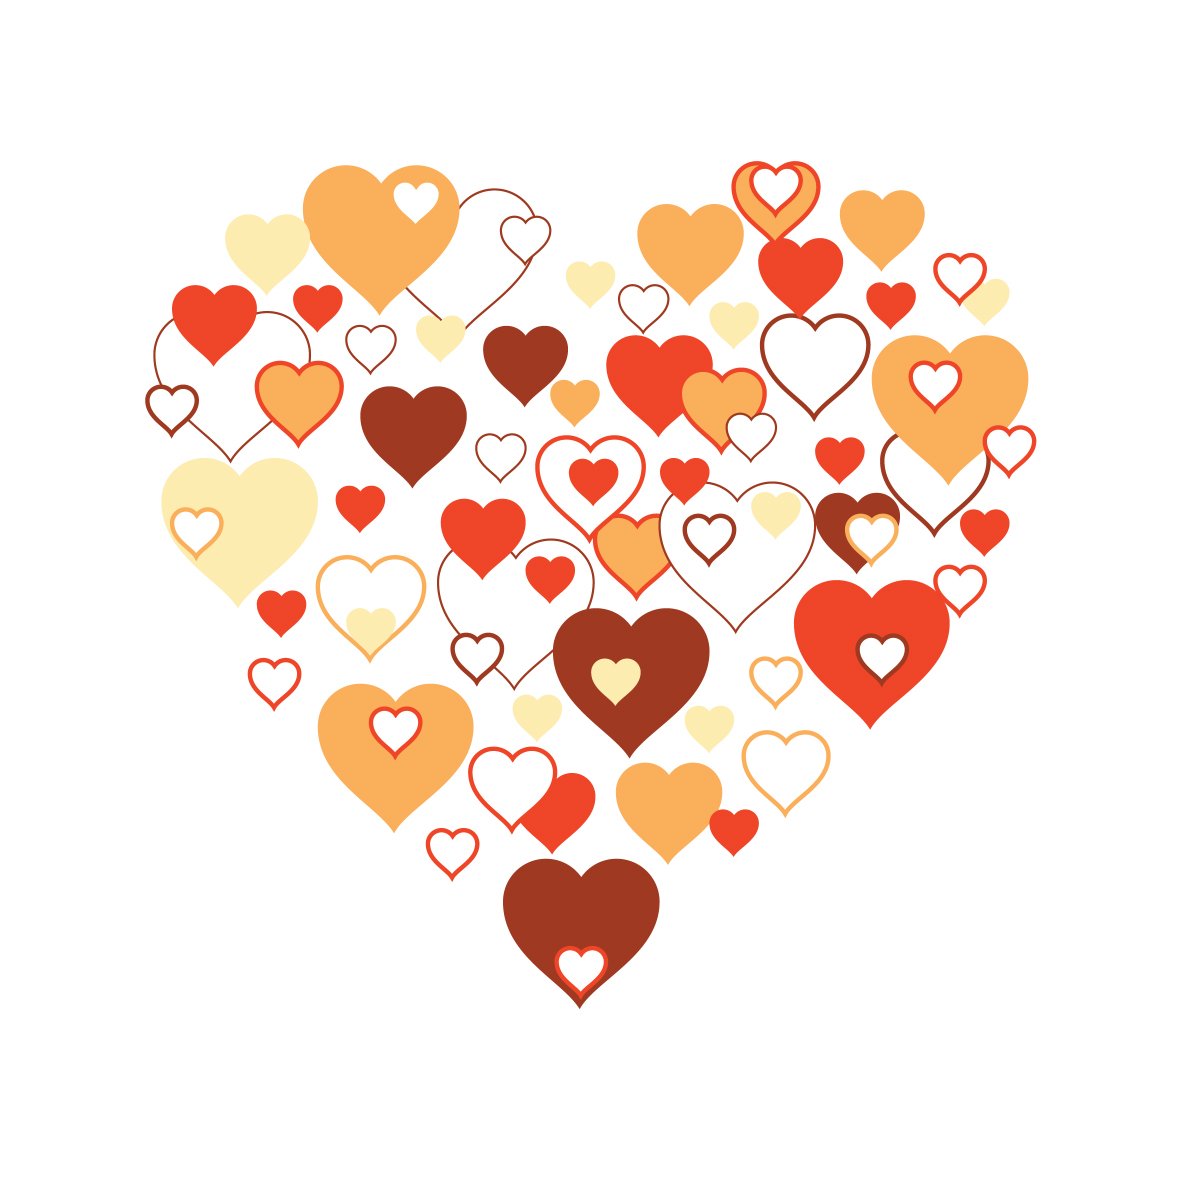 many hearts form a heart shape against a white background